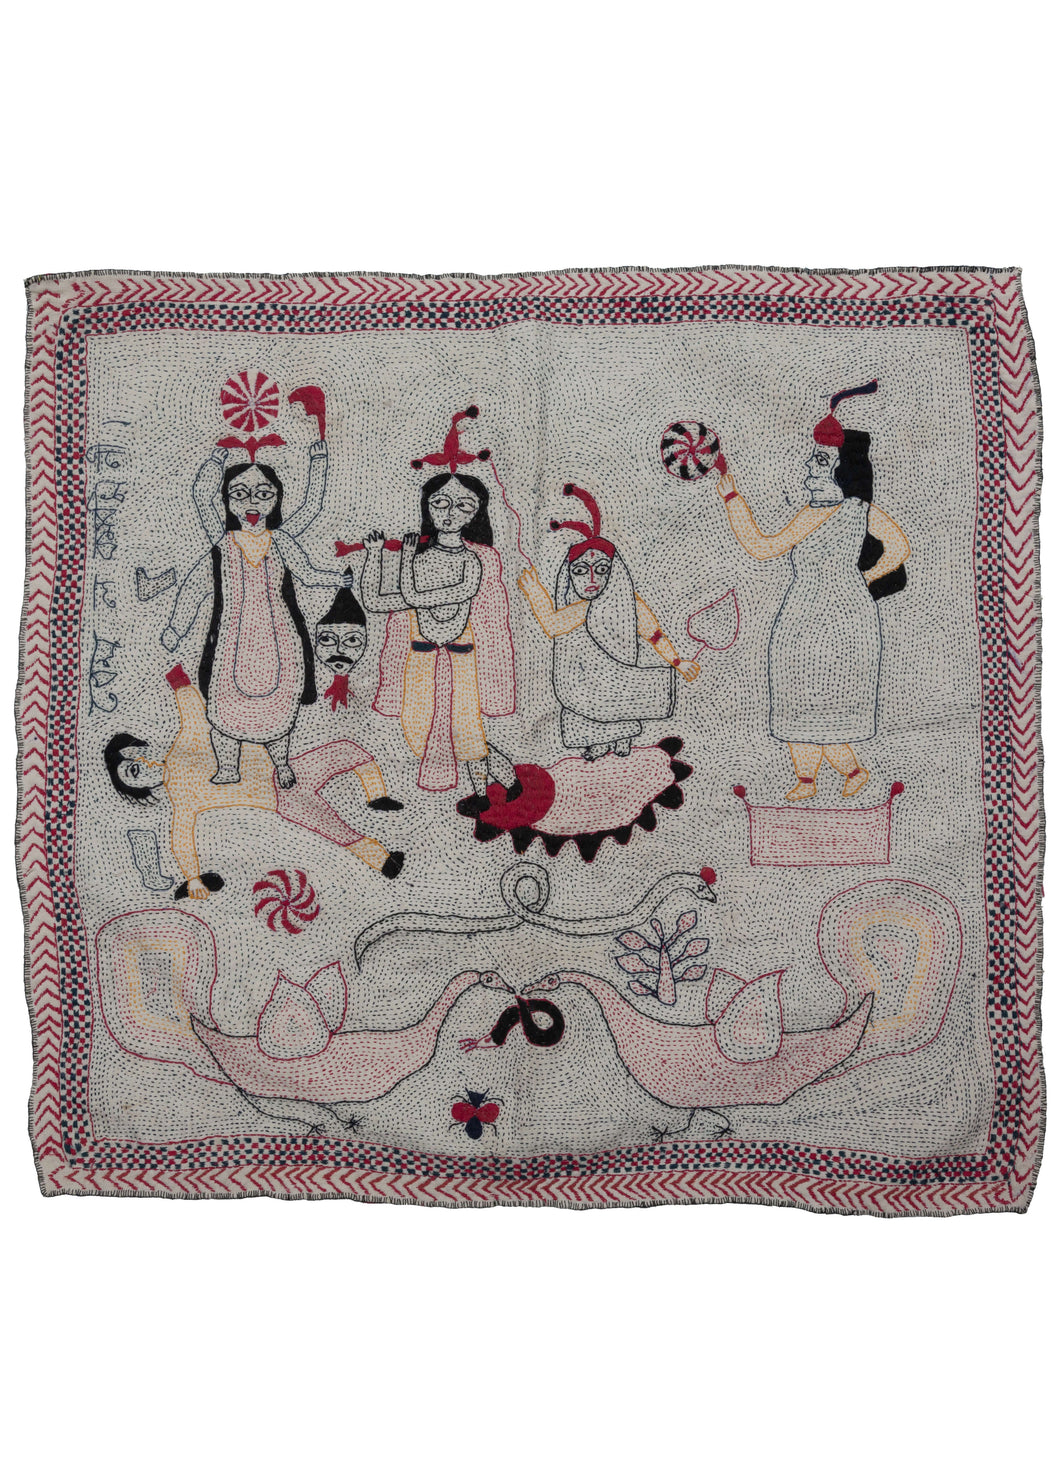 This Durga & Kali Nakshi Kantha features a representation of Kali the Hindu goddess of power, time, change, creation, and destruction. Durga has transformed into Kali who has gone on a rampage destroying the universe. She is seen holding the decapitated head of Mahishasura while those around her calm her including Shiva who is underfoot.